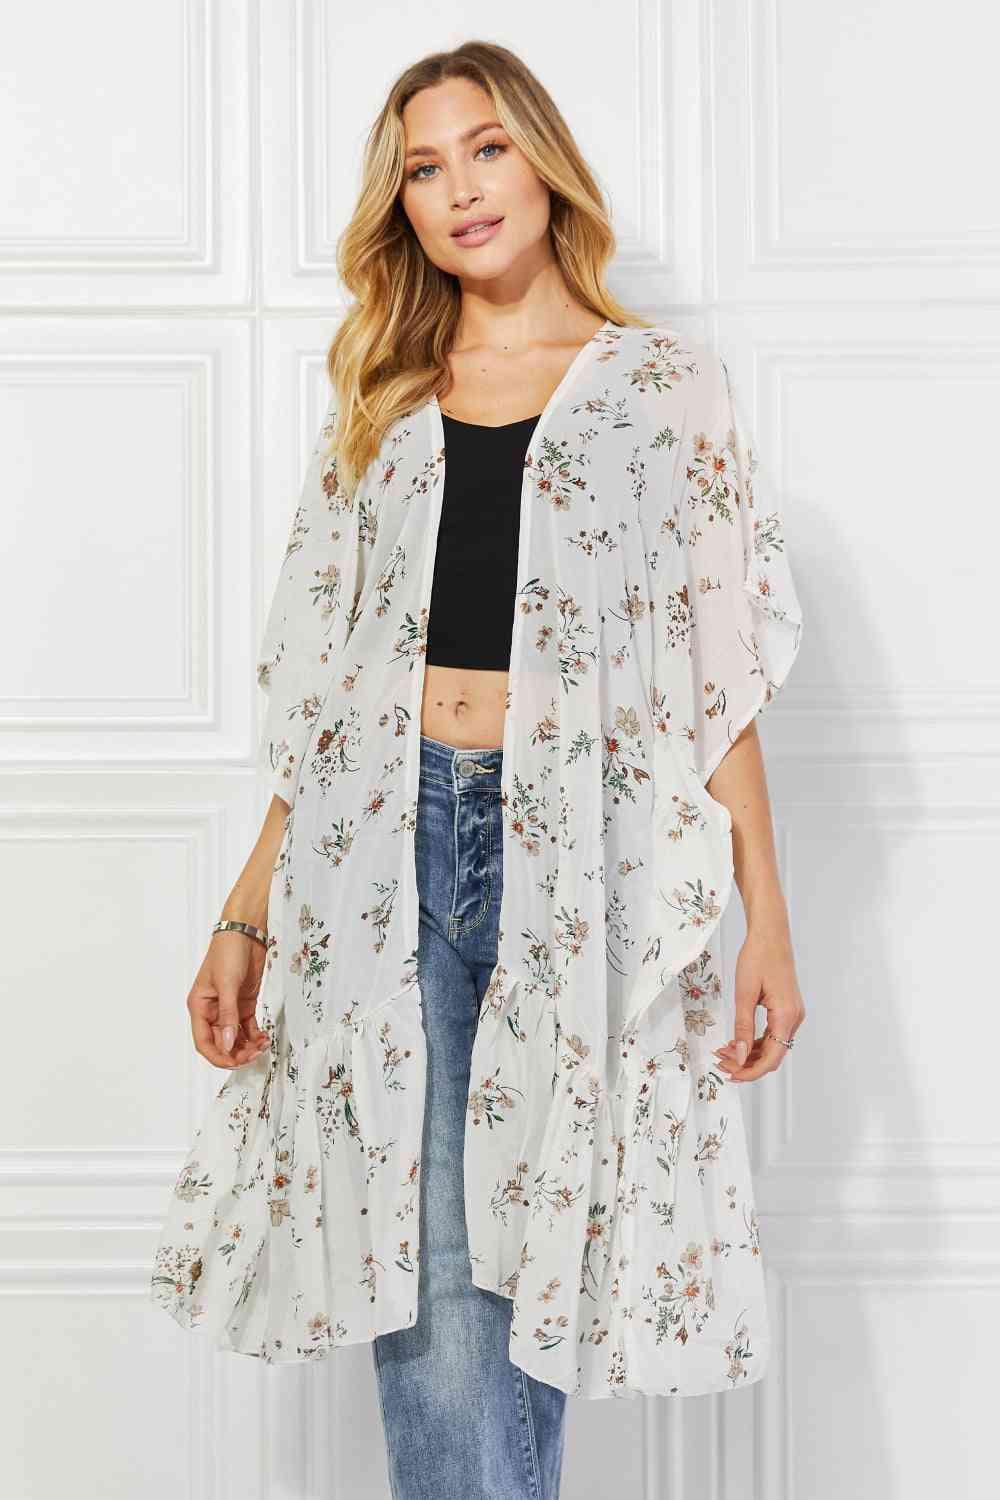 Justin Taylor Meadow of Daisies Floral Kimono - AMIClubwear